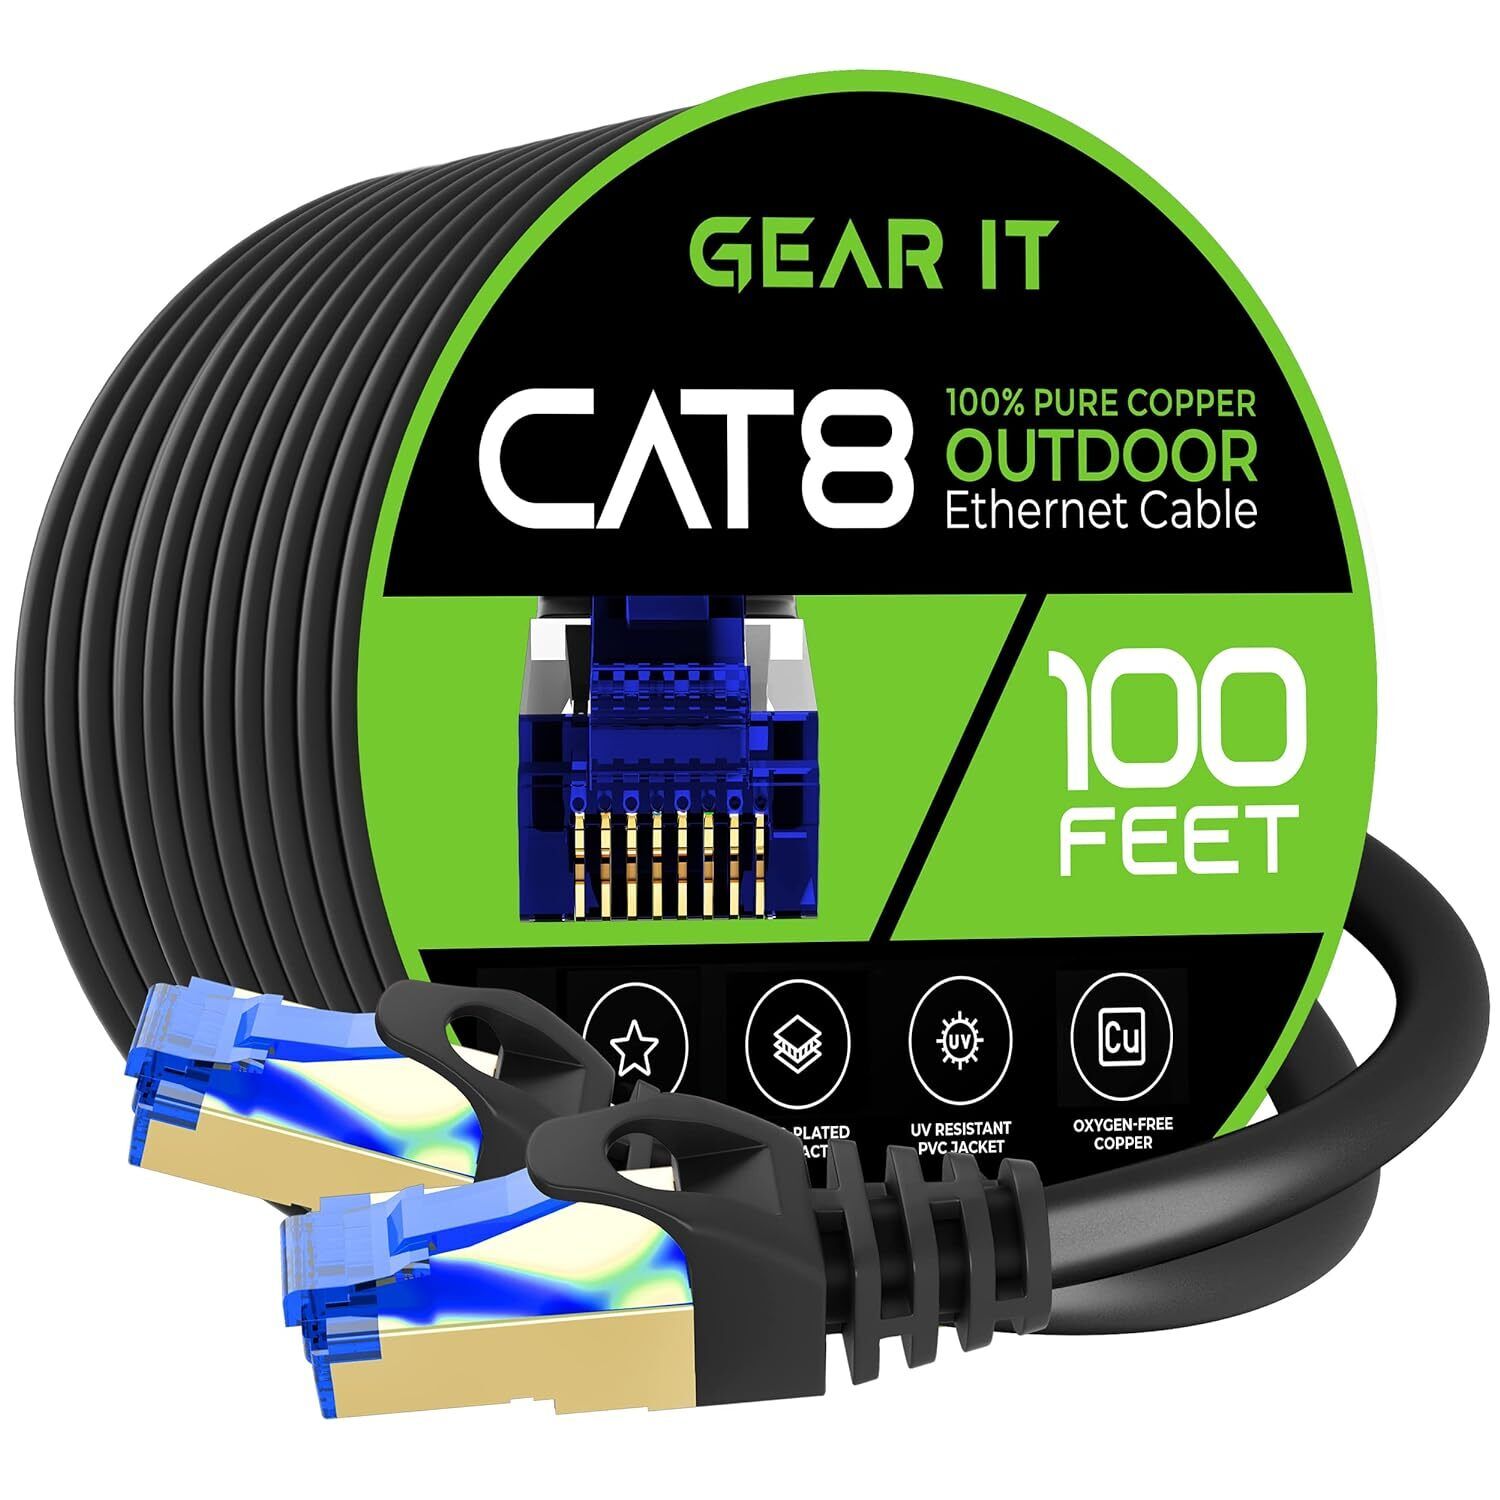 GearIT Cat8 Outdoor Ethernet Cable (100 Feet) Waterproof, Direct Burial, In-Gr